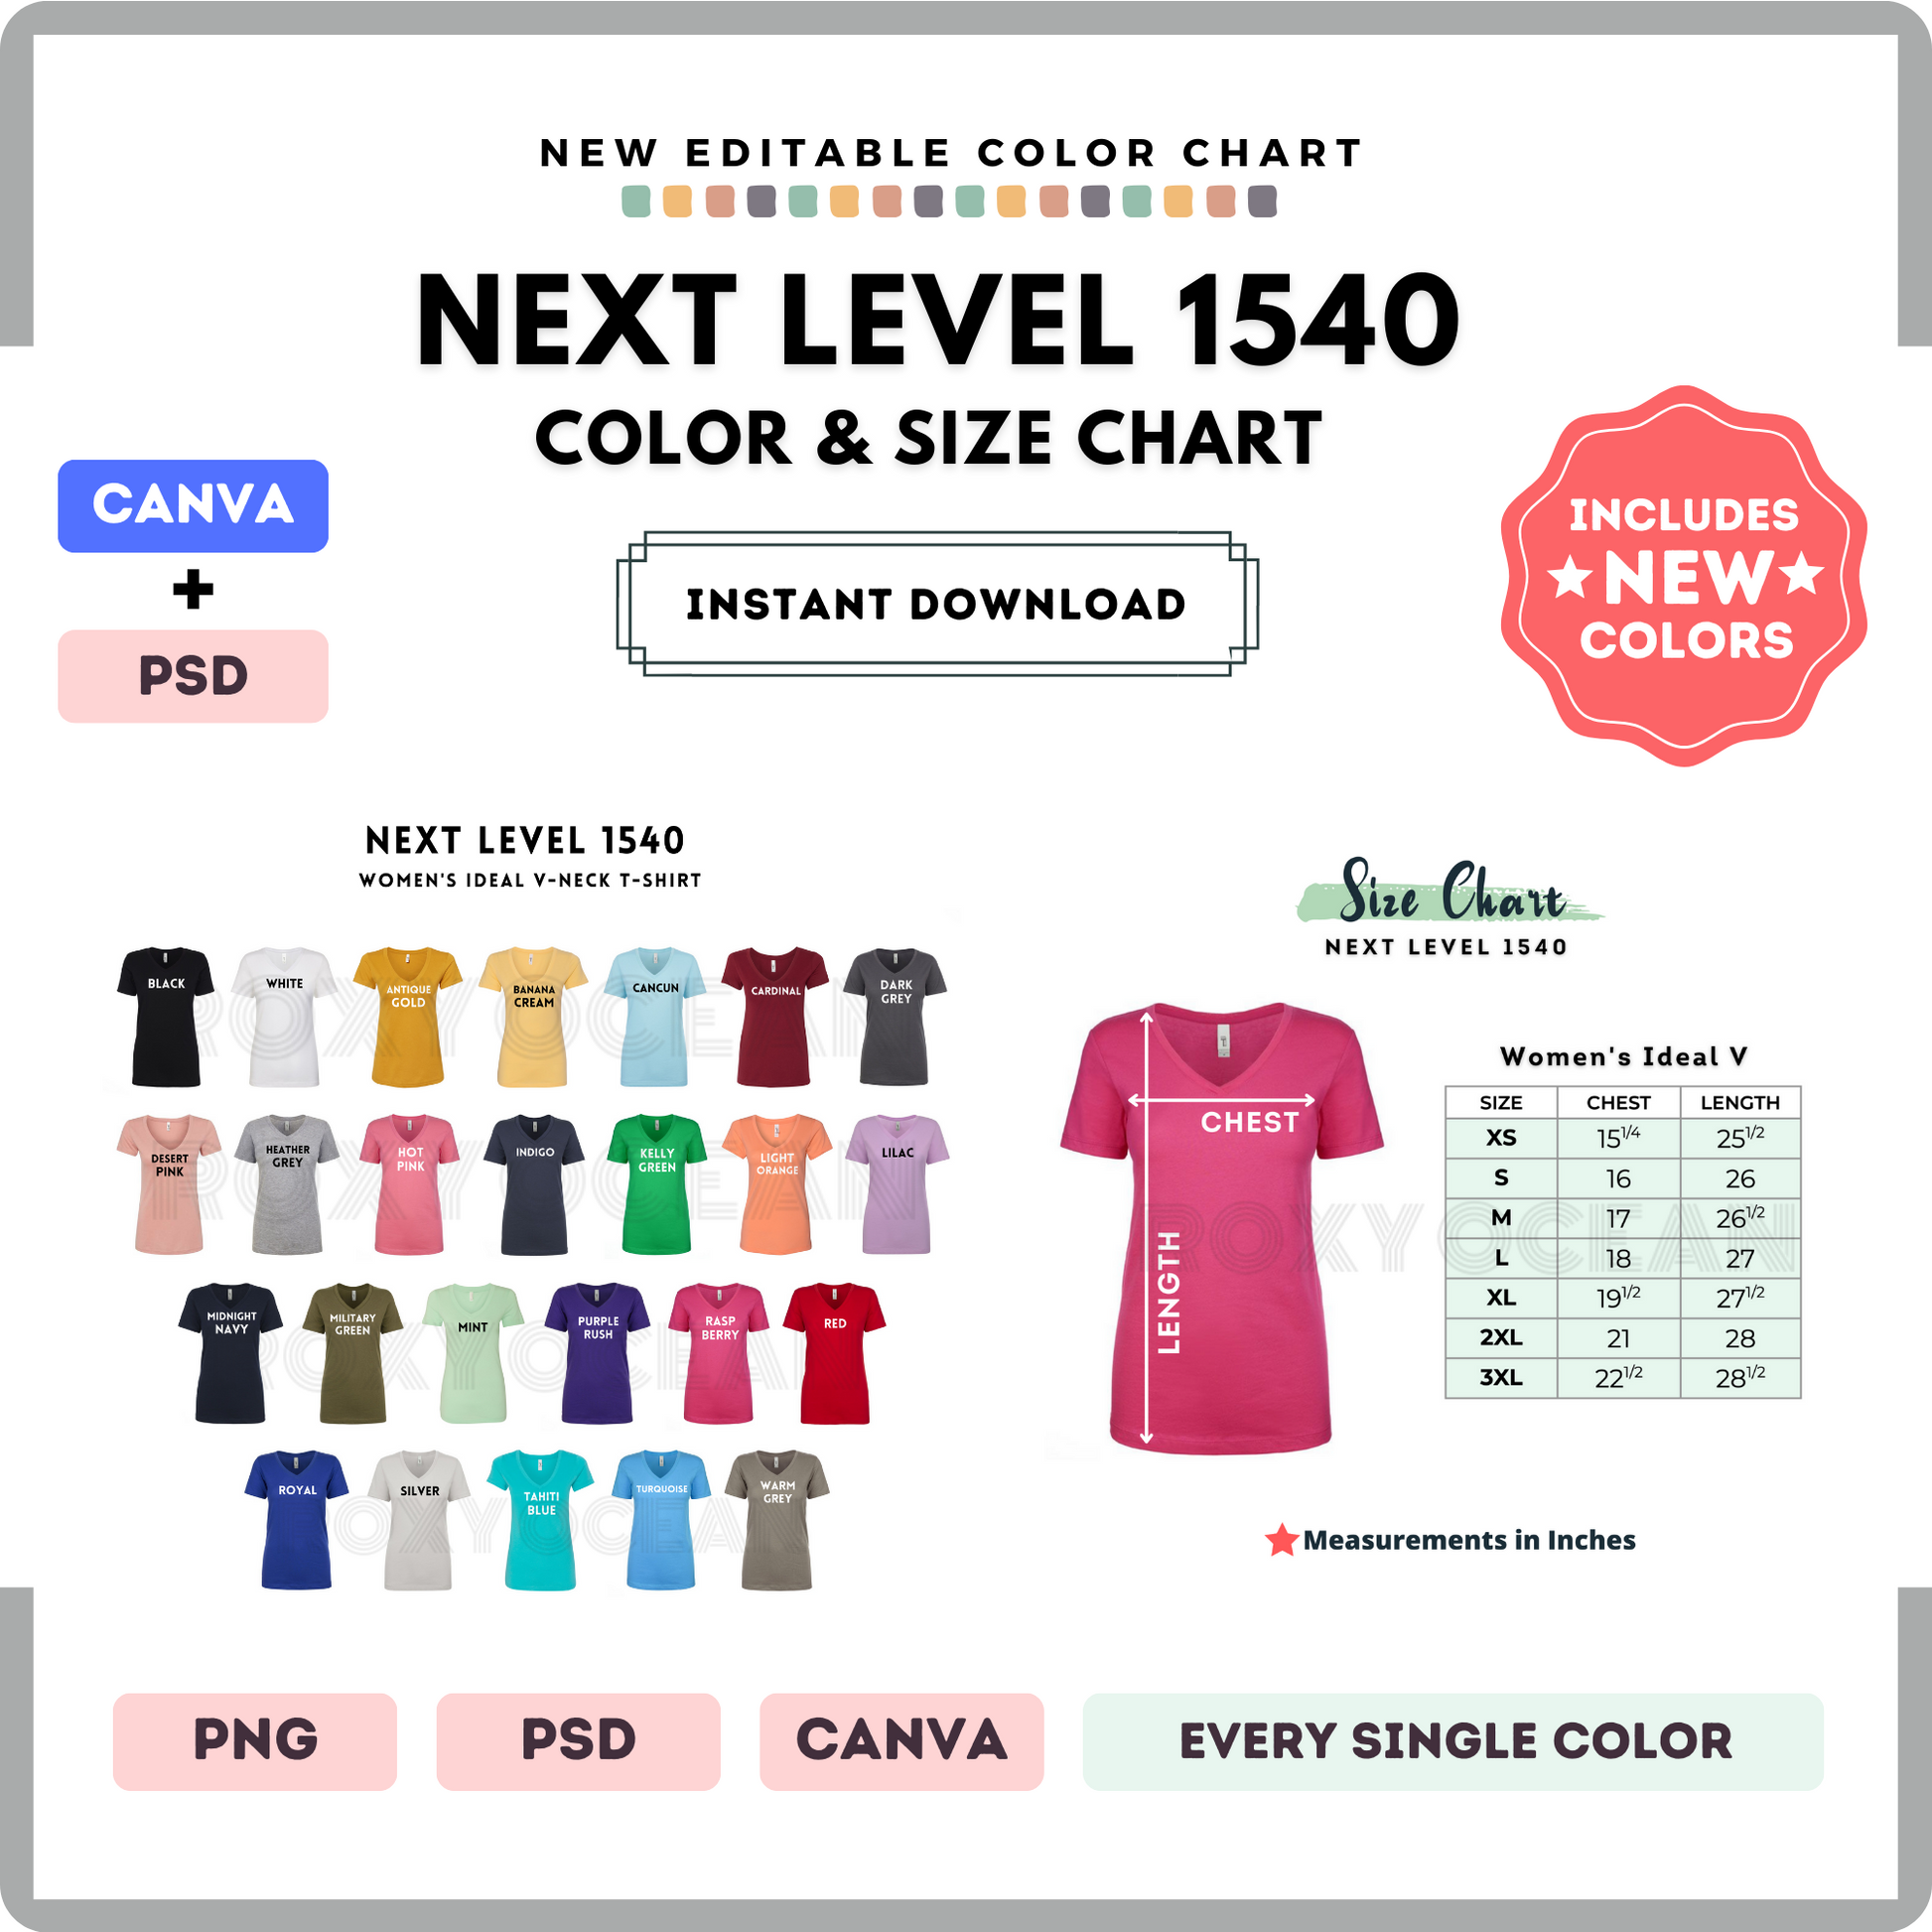 Next Level 1540 Color and Size Chart